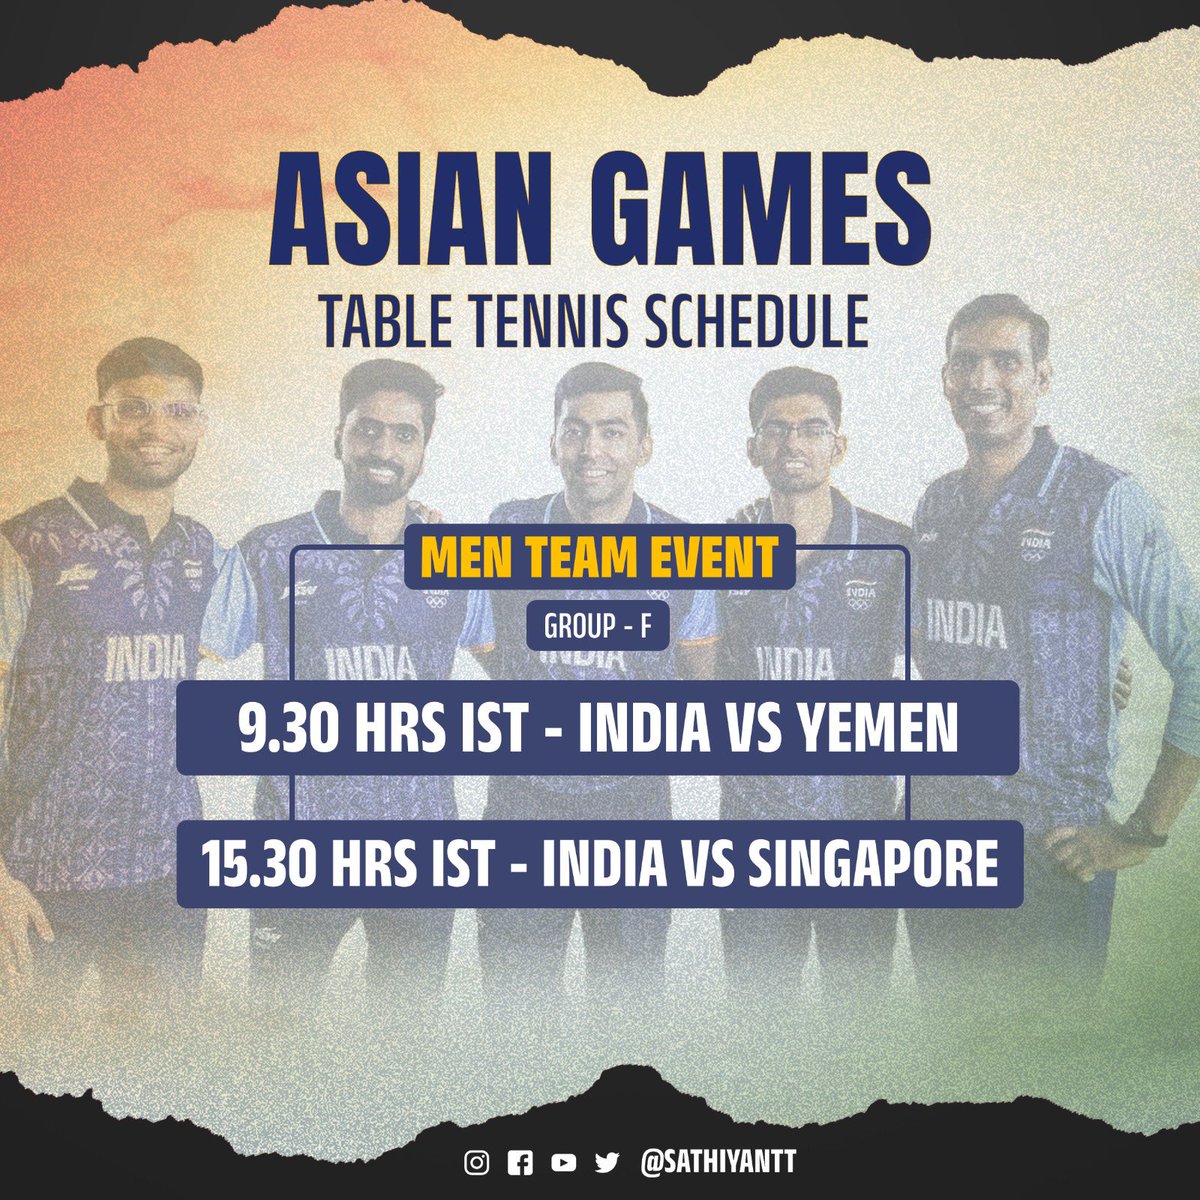 IT’S SHOWTIME 💪 We kick off our Asian Games campaign tomorrow (22nd September) in the Men Team event here in China !! Let’s go 🇮🇳 Catch live action on @SonySportsNetwk & Sony liv . #sathiyantt #tabletennis #sports #asiangames #teamindia Pc : @bigBdesign